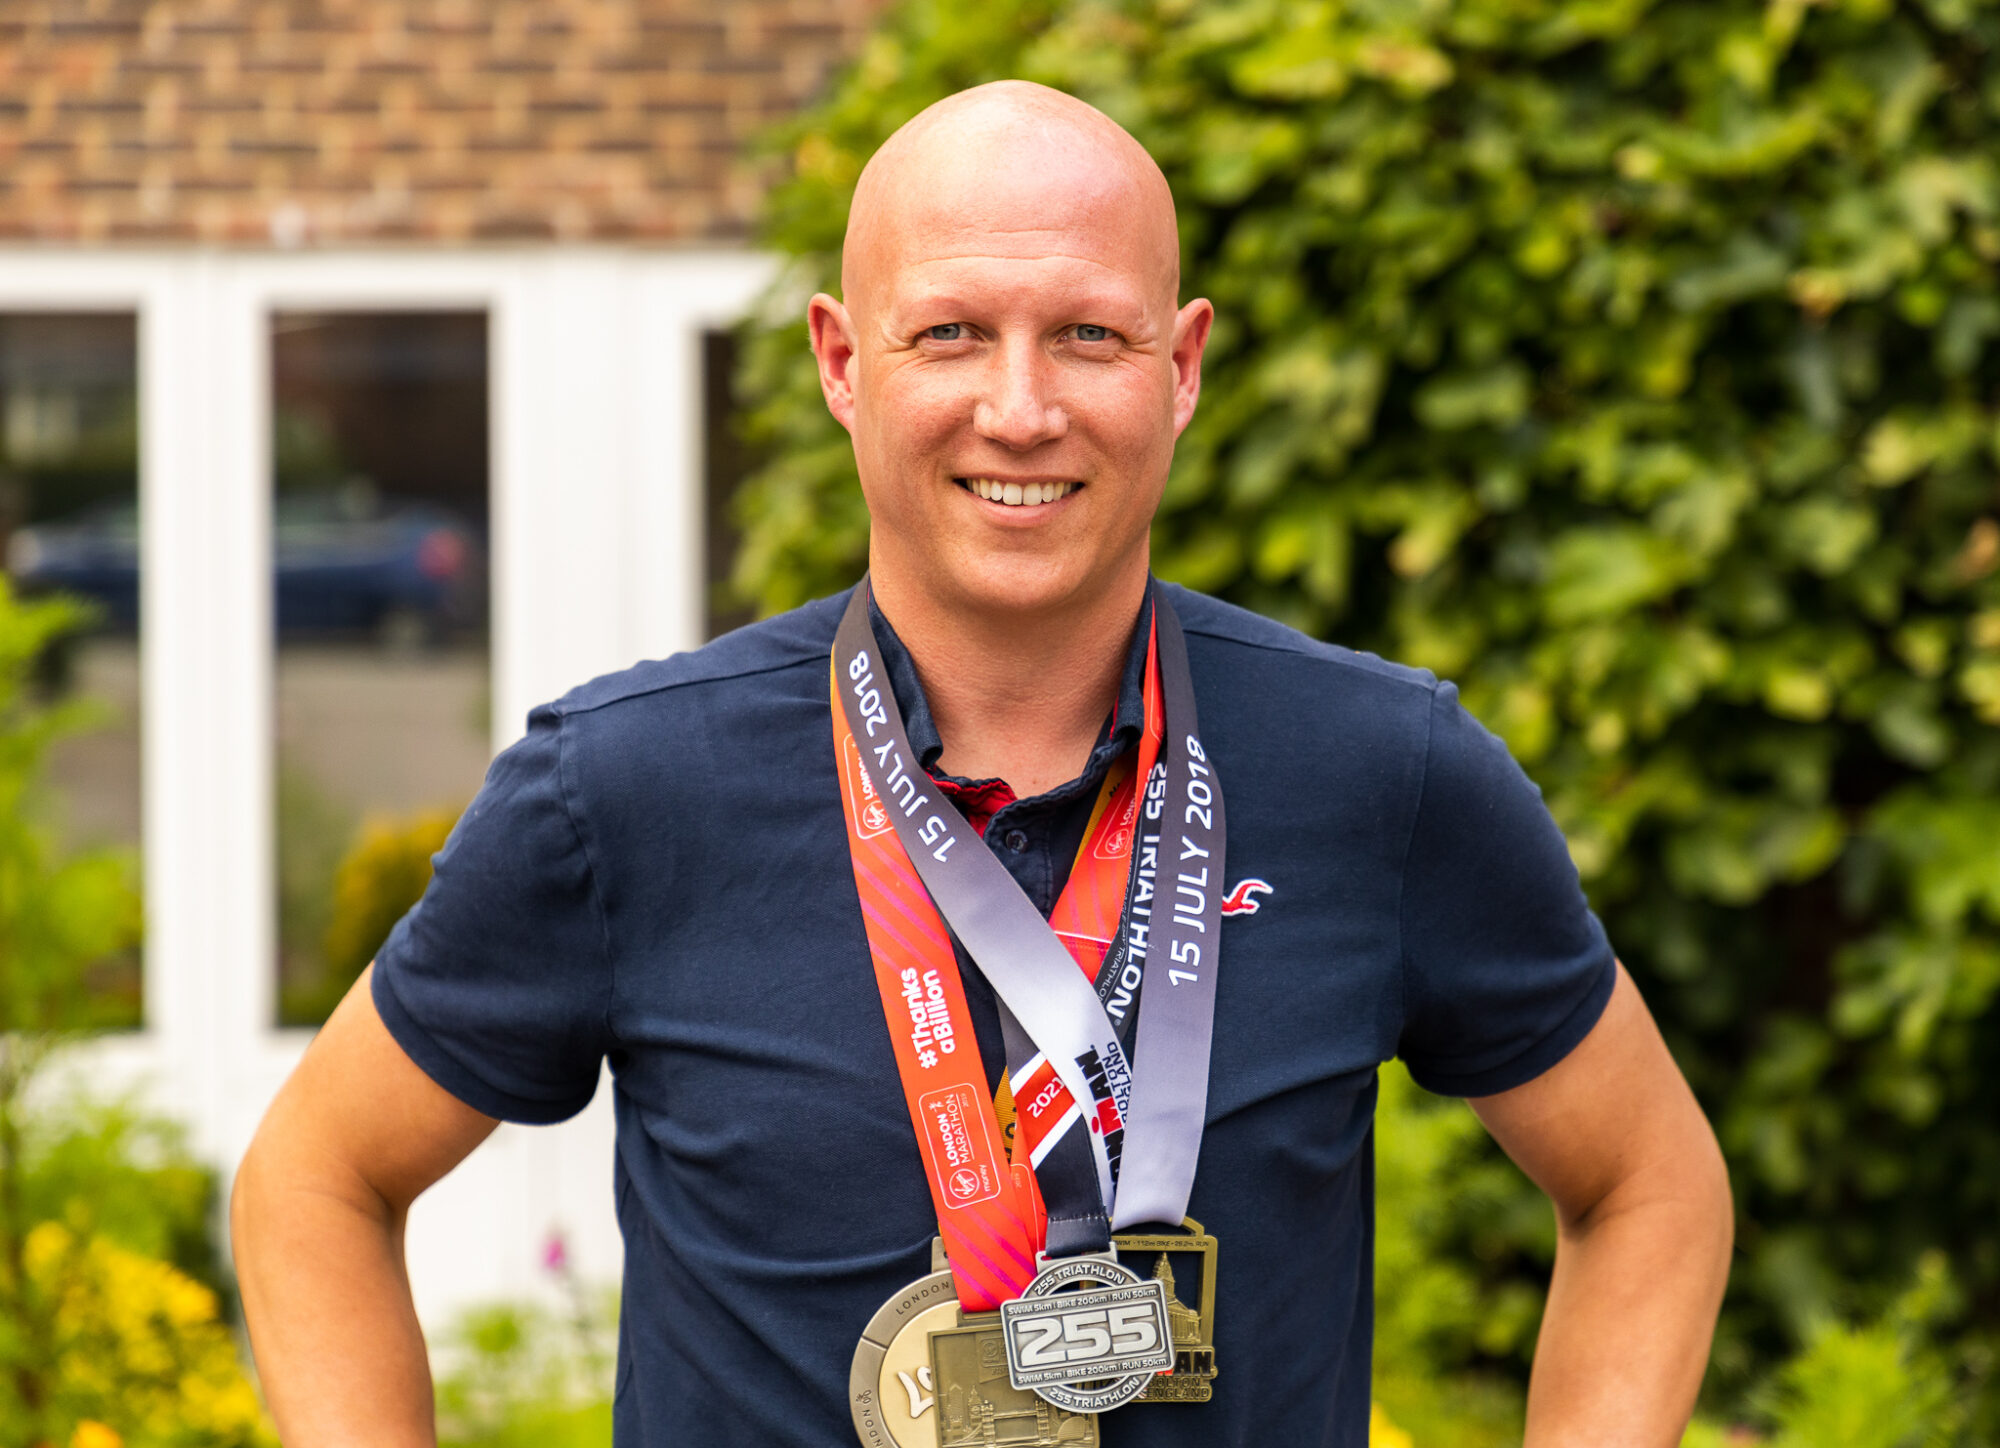 Steve Lindsey outside Hospice with Medals